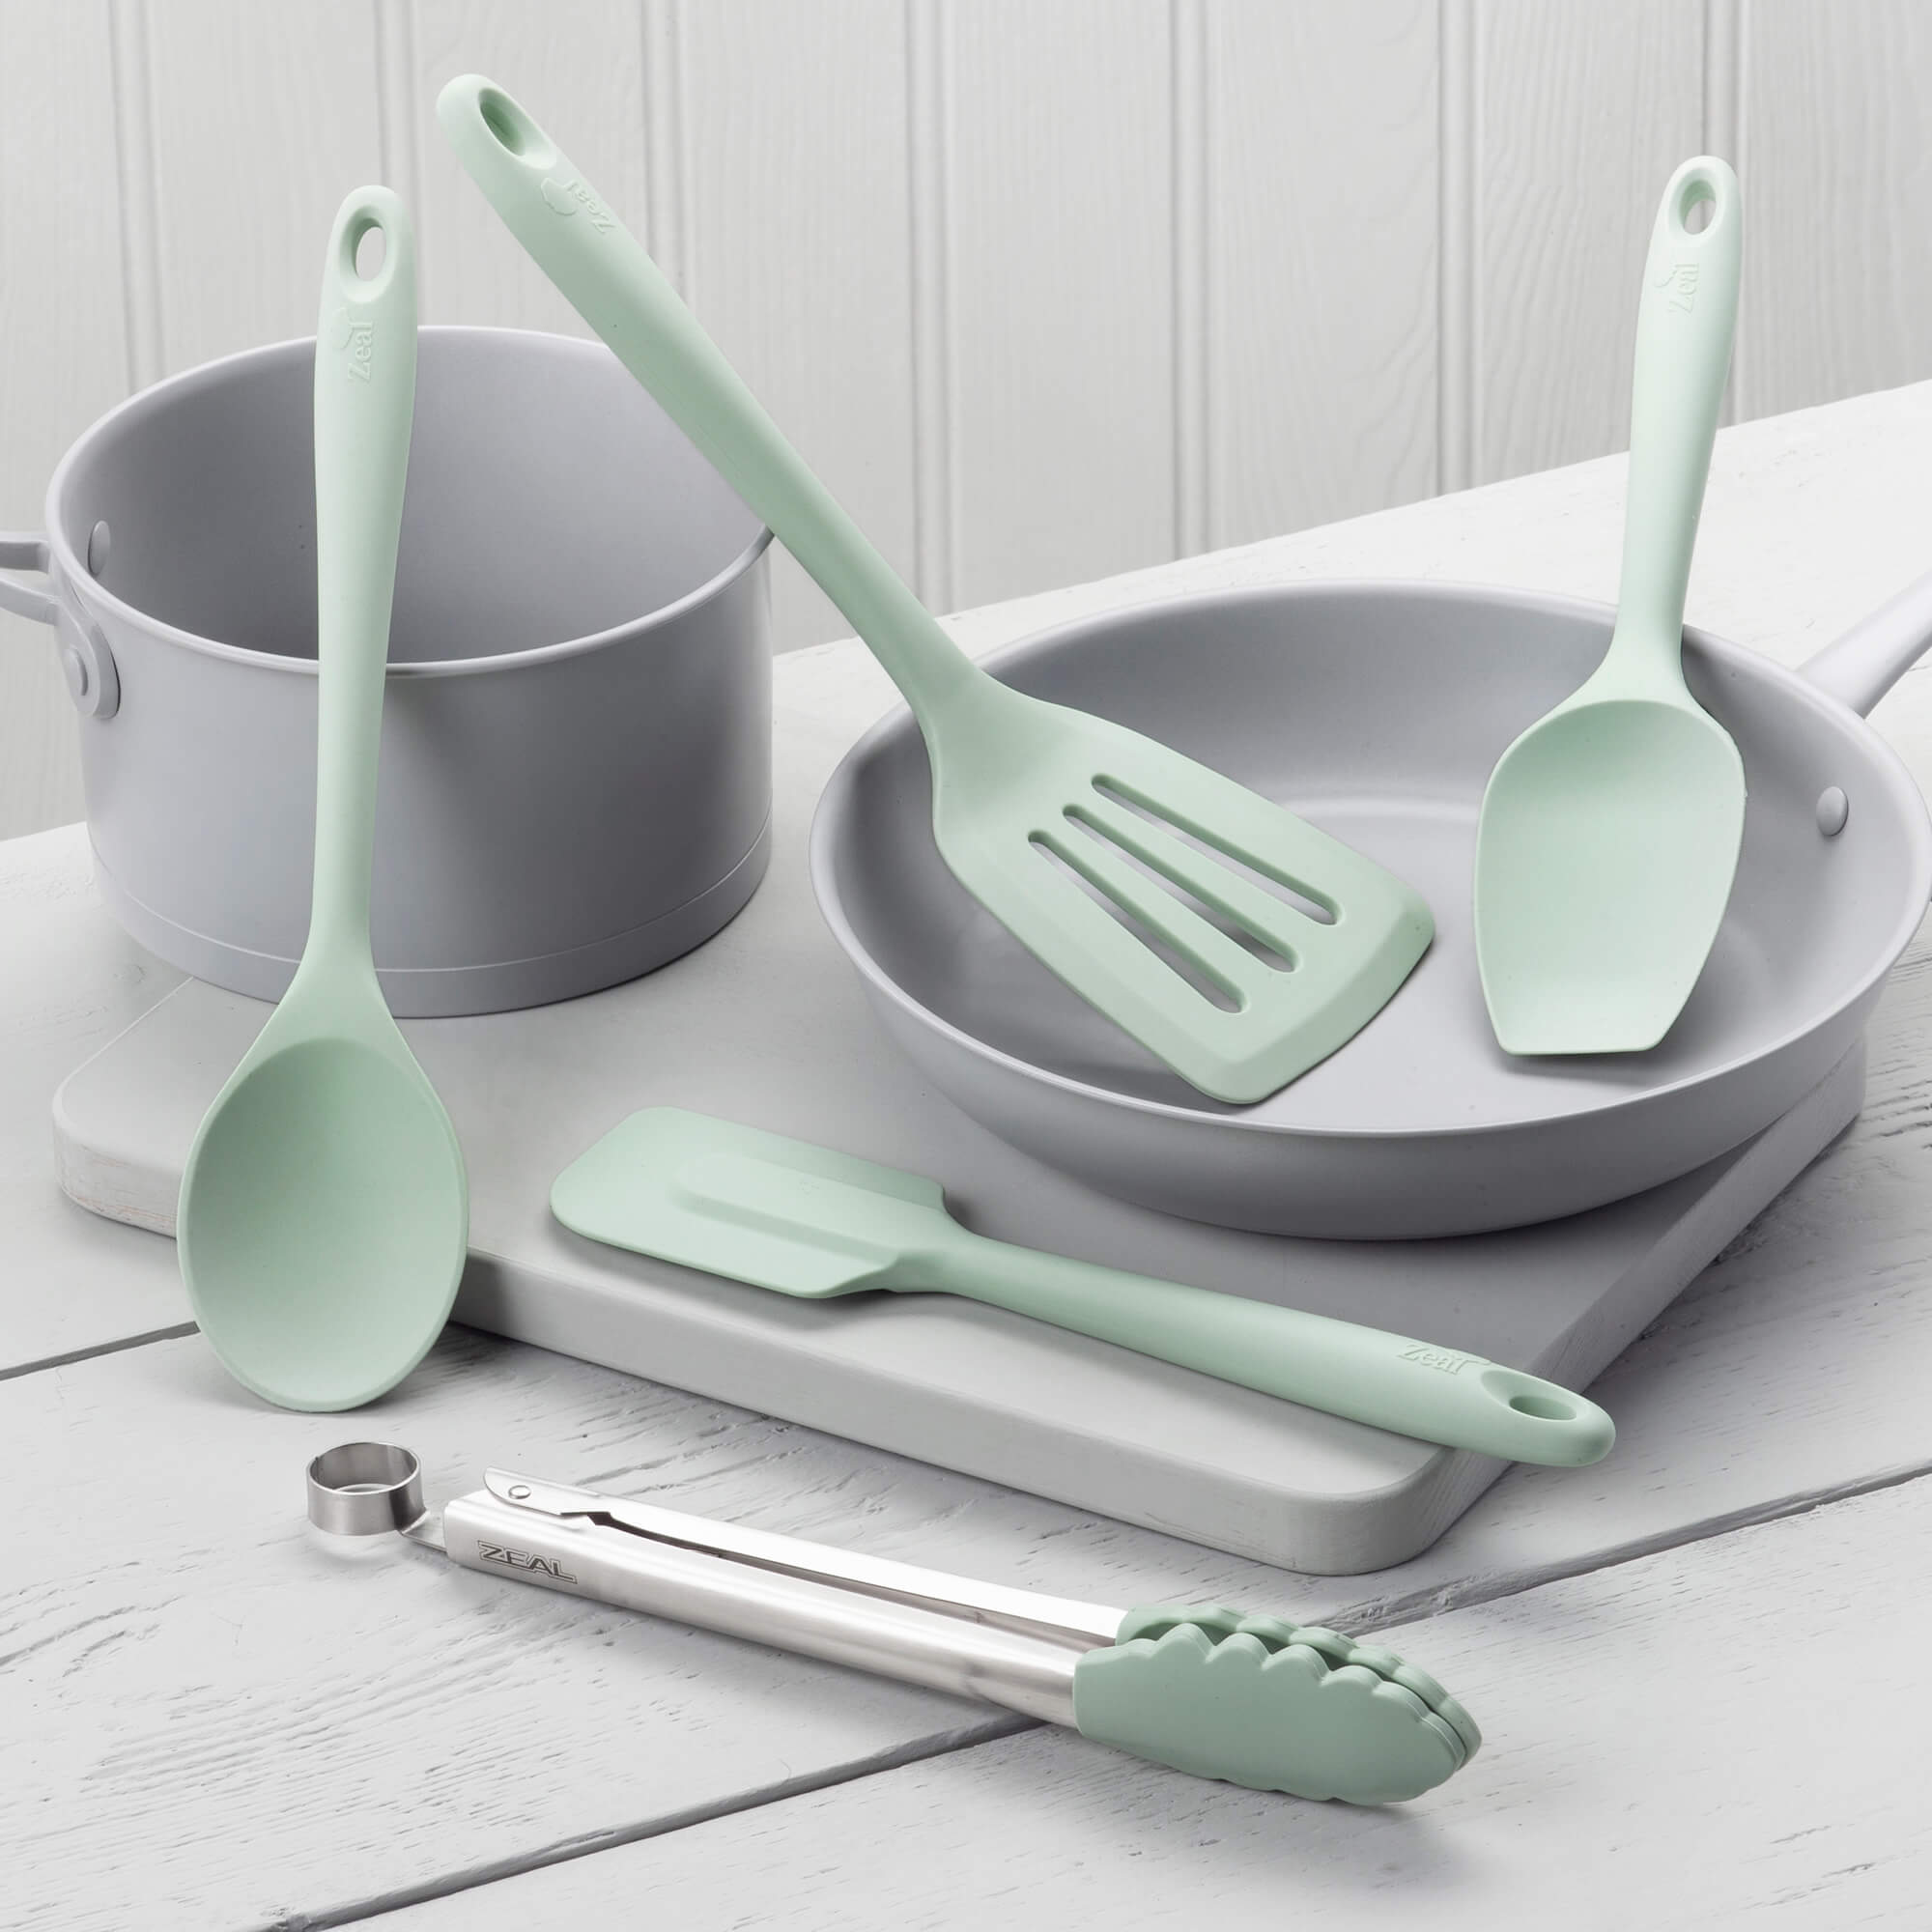 Zeal Kitchen Tongs, Slotted Turner, Spoon, Spatula Spoon & Spatula Set in Sage Green